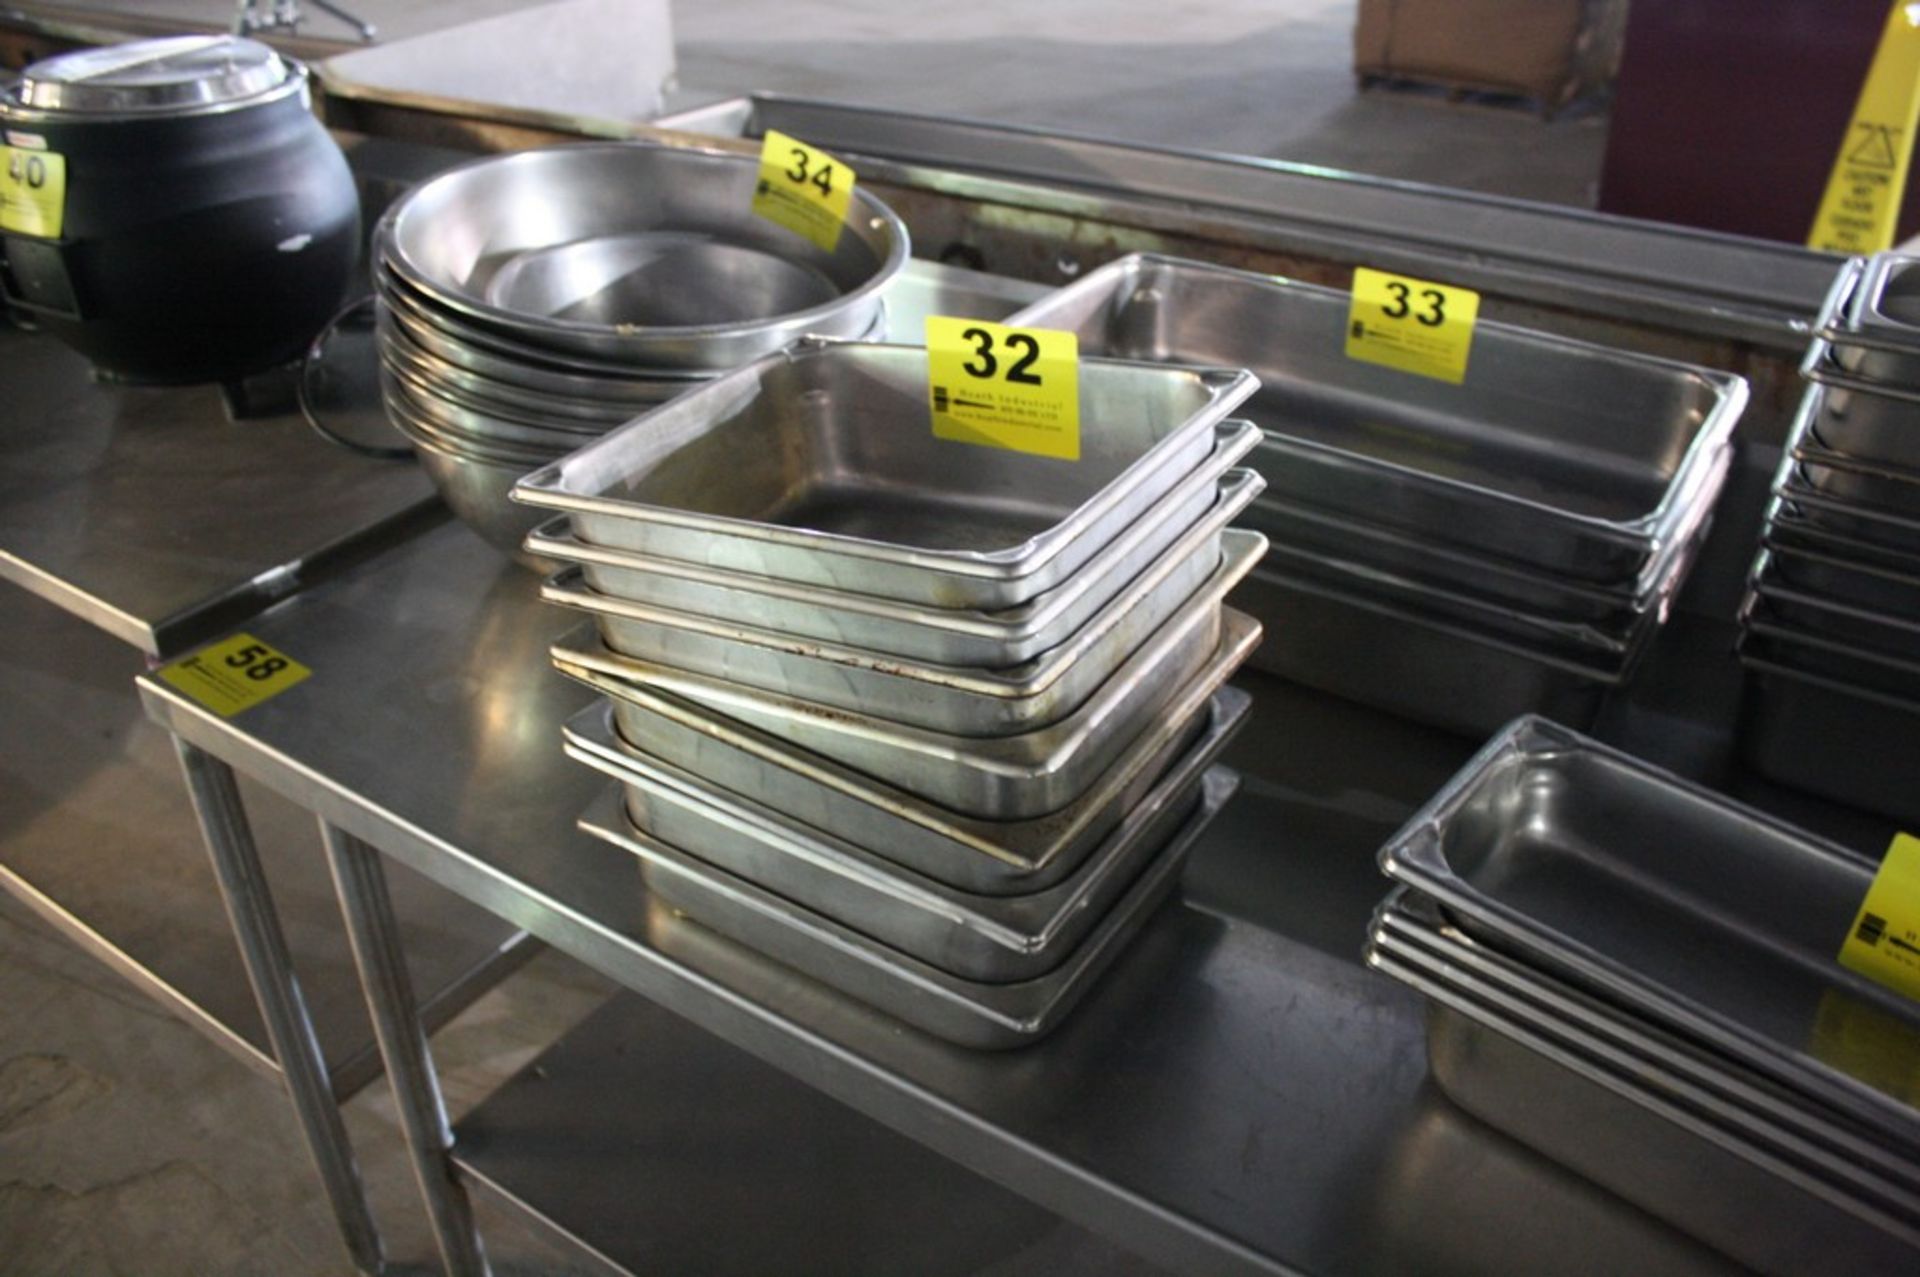 (7) STAINLESS STEEL SERVING TRAYS - 12" X 10"